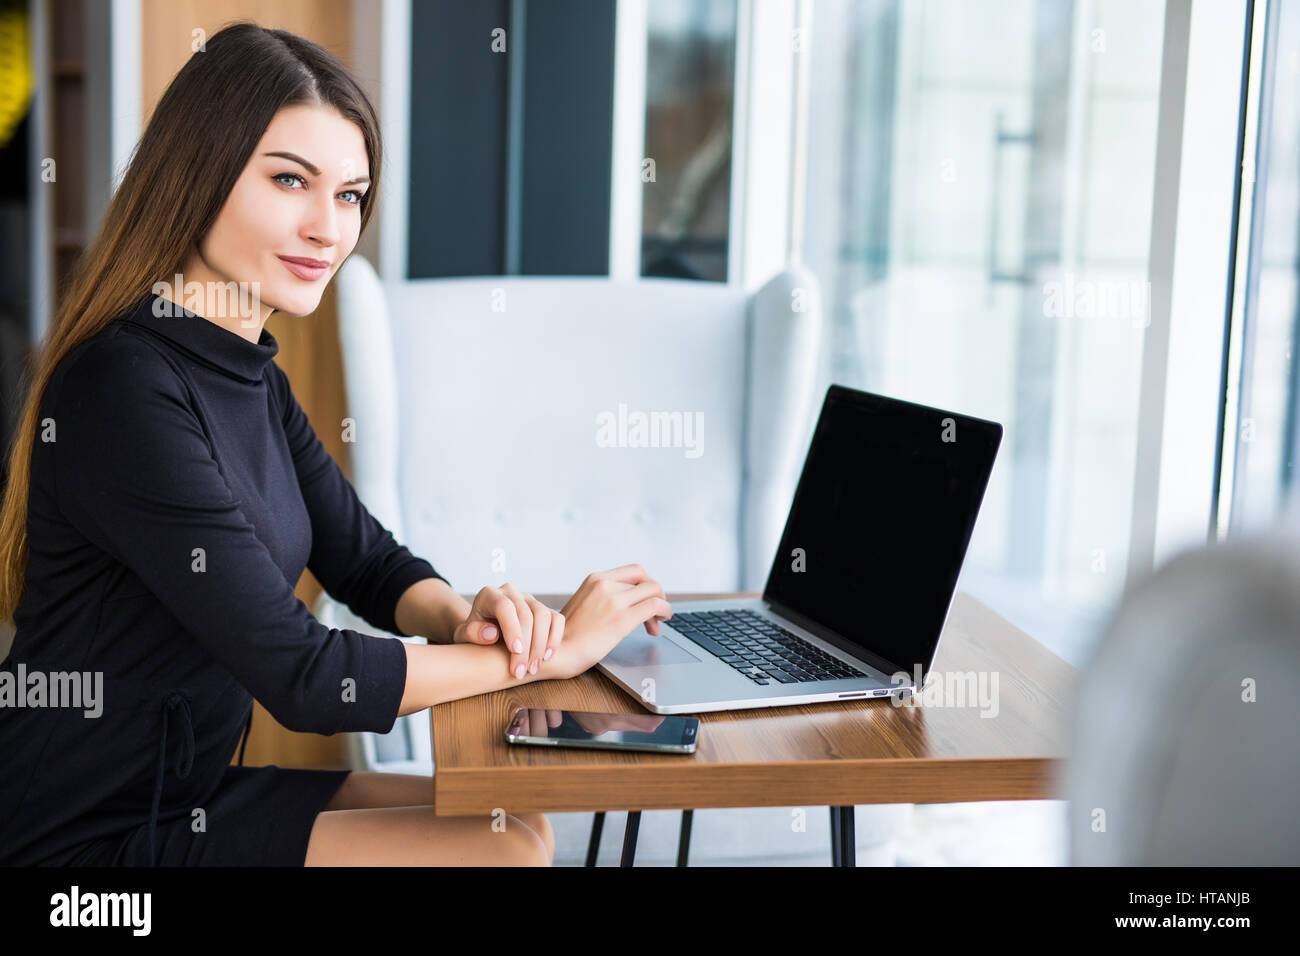 Young beauty businesswoman using laptop in cafe Stock Photo